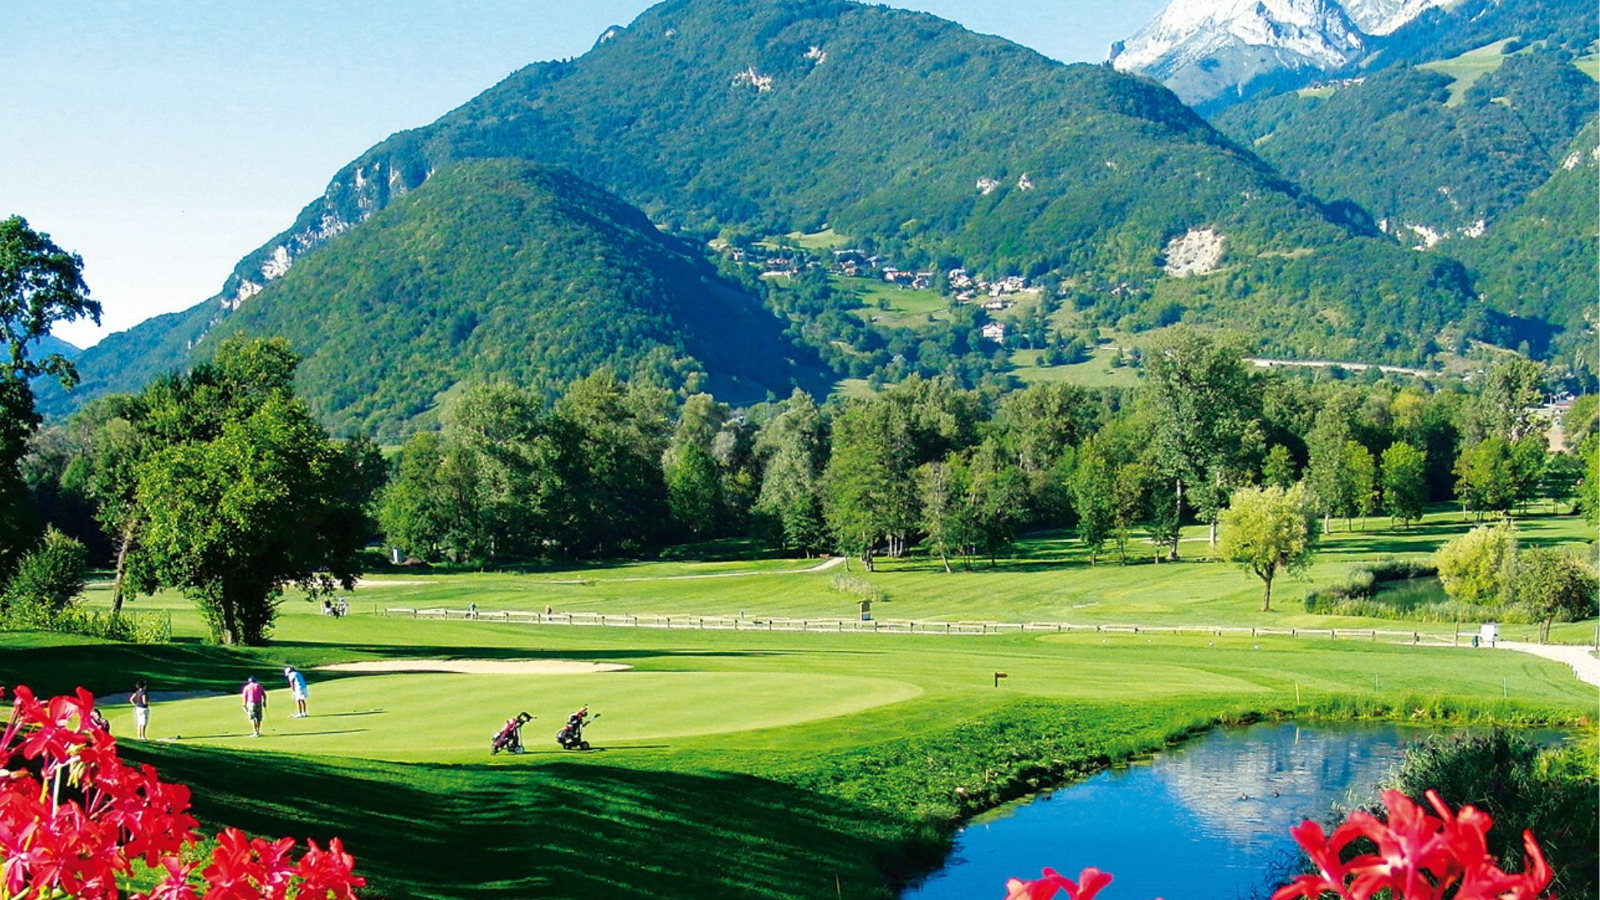 pond flowers and mountains golf